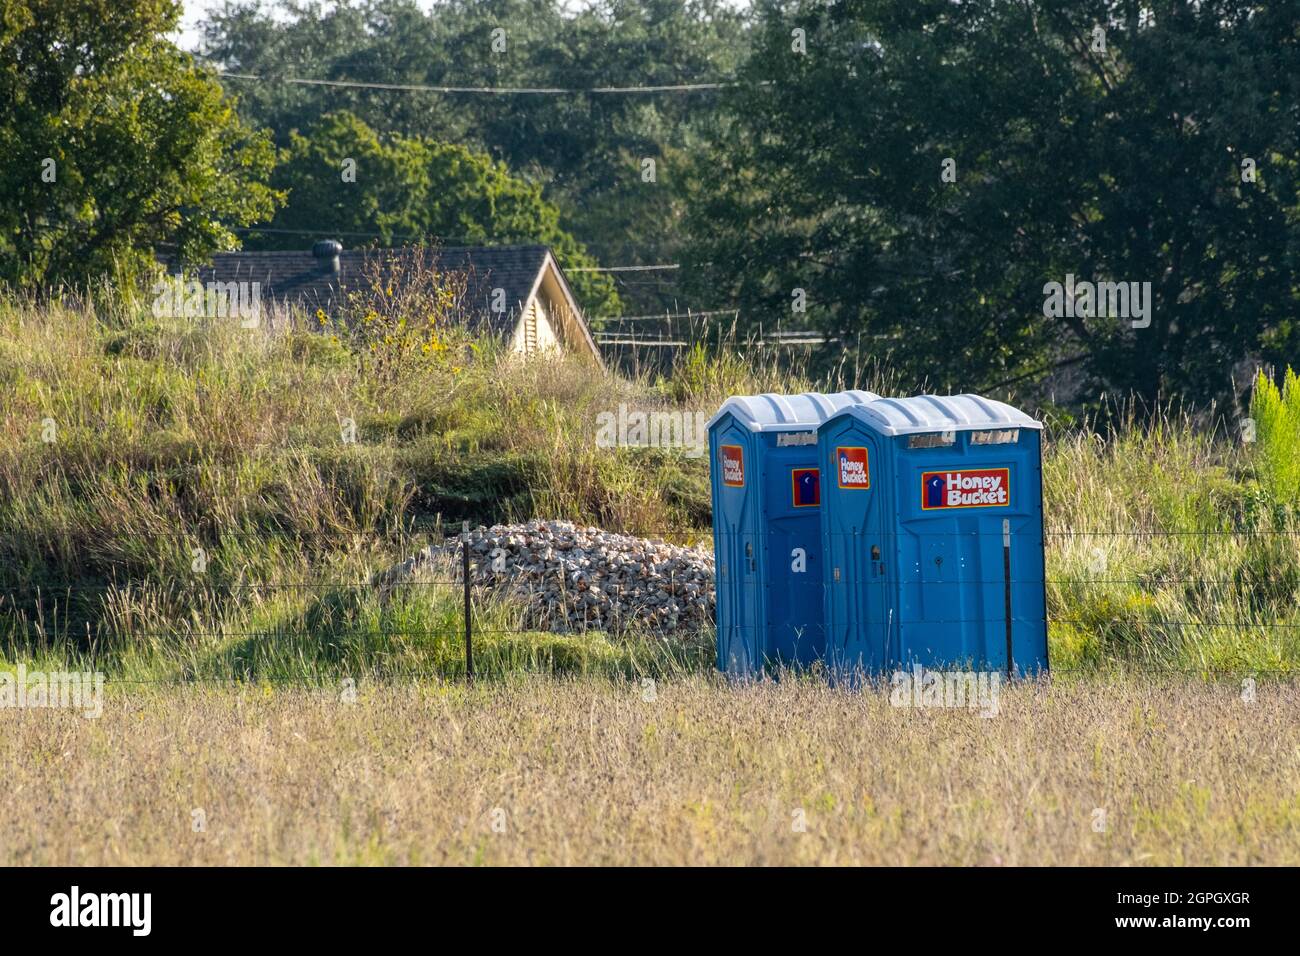 Two portable toilets' painted blue in US setting out in grassy field with house in background Stock Photo